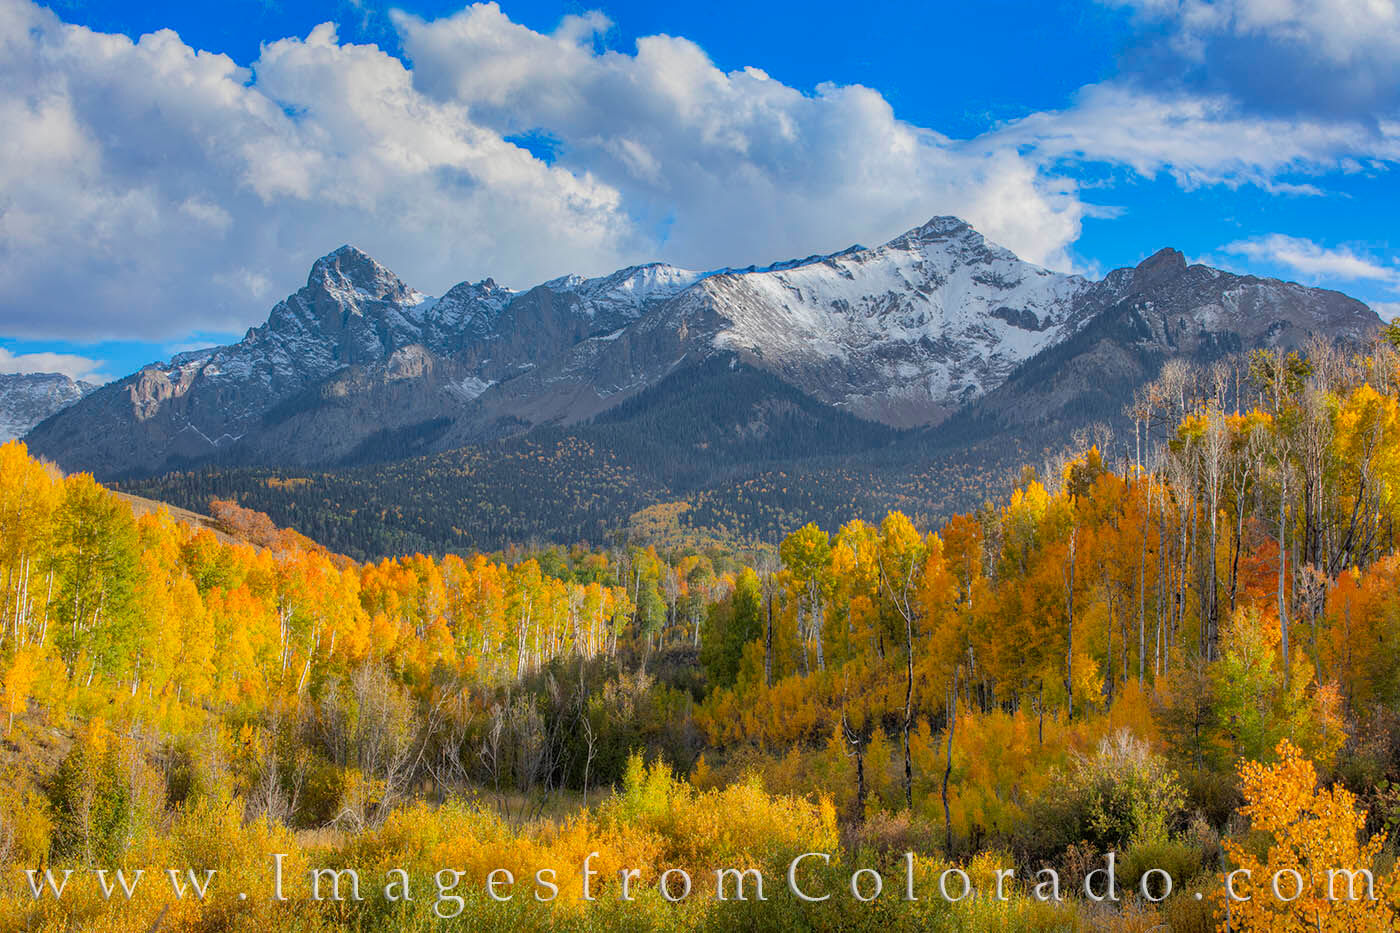 Aspen show off their fall colors along Last Dollar Road on a cool October afternoon.